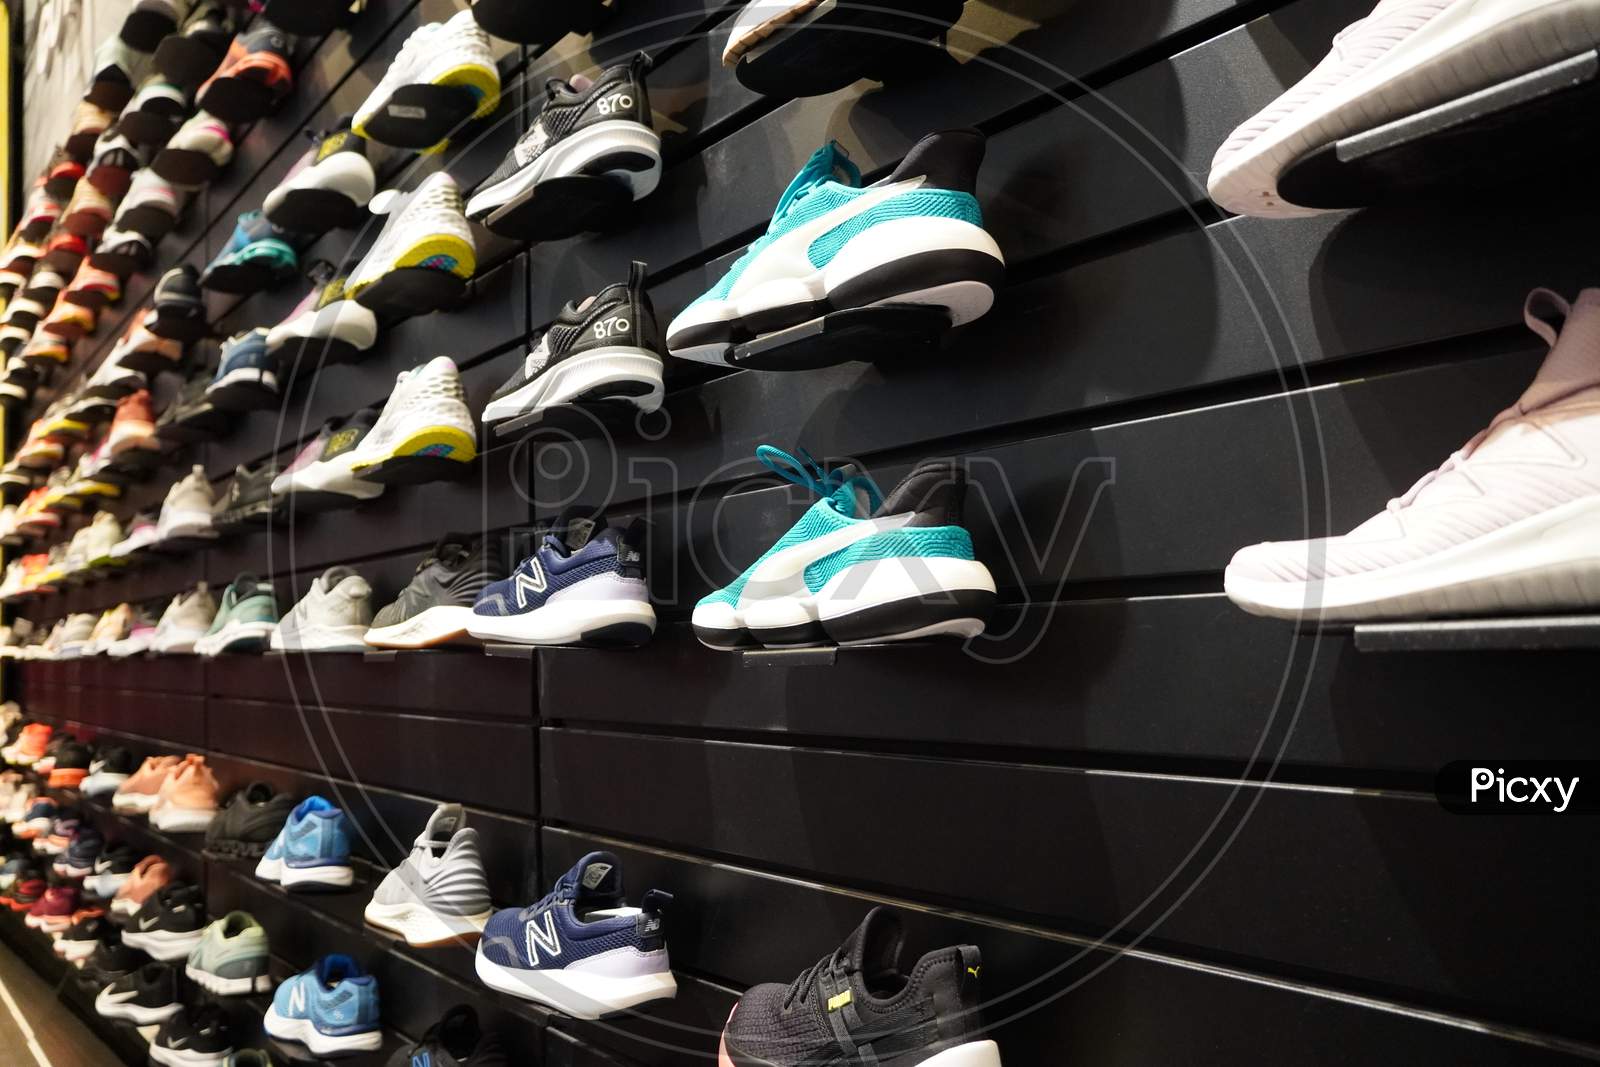 Shop Display Of A Lot Of Sports Shoes On A Wall. A View Of A Wall Of Shoes Inside The Store. Modern New Stylish Sneakers Running Shoes For Men And Women